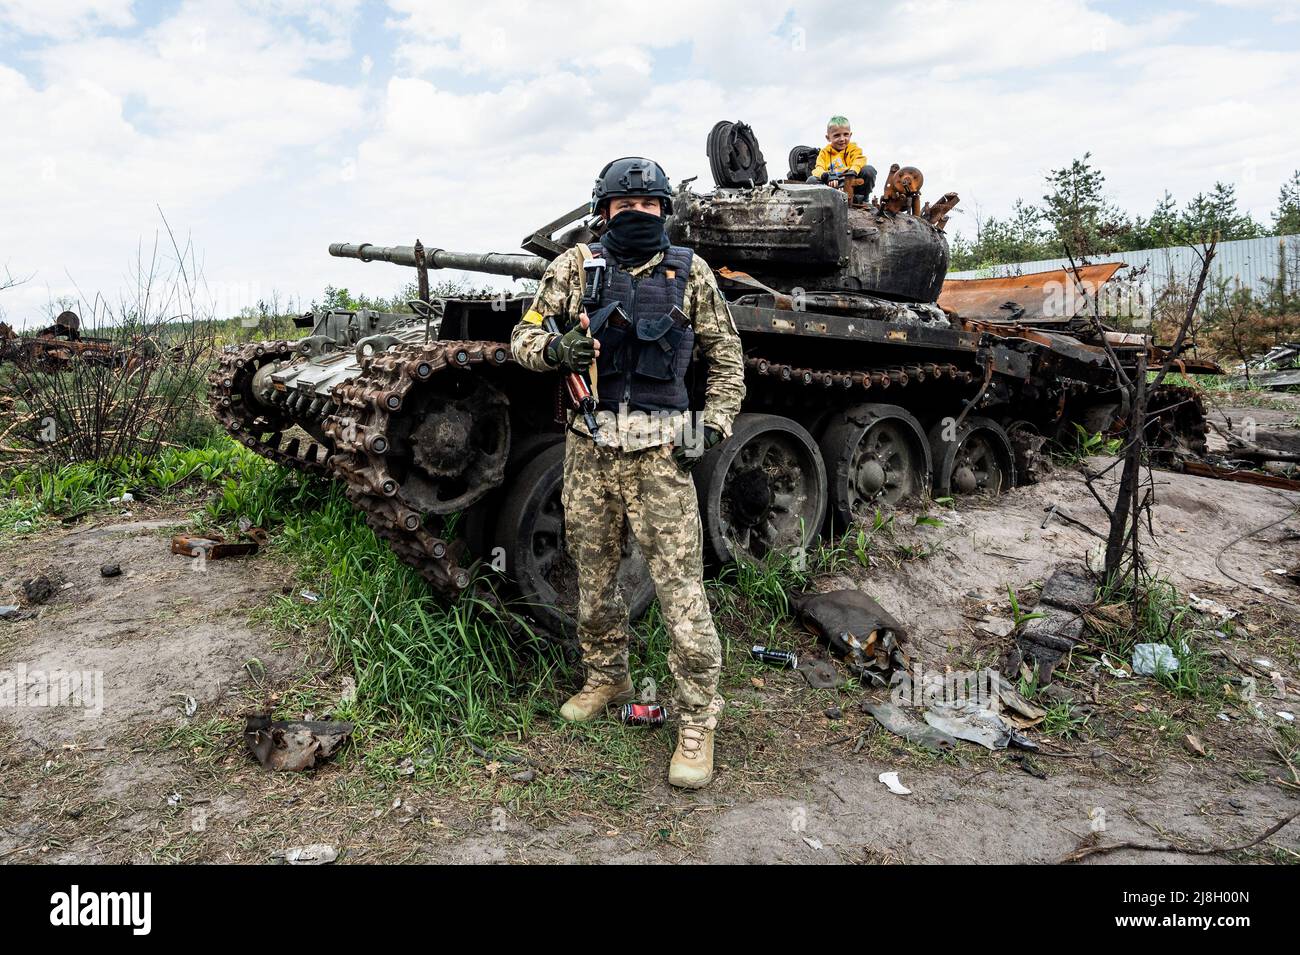 Nalyvaikivka, Ukraine. 15th May, 2022. A soldier (who refused to give his name due to issues of personal safety) who fought where this destroyed Russian tank is located posing with his son who is on the tank. Credit: SOPA Images Limited/Alamy Live News Stock Photo